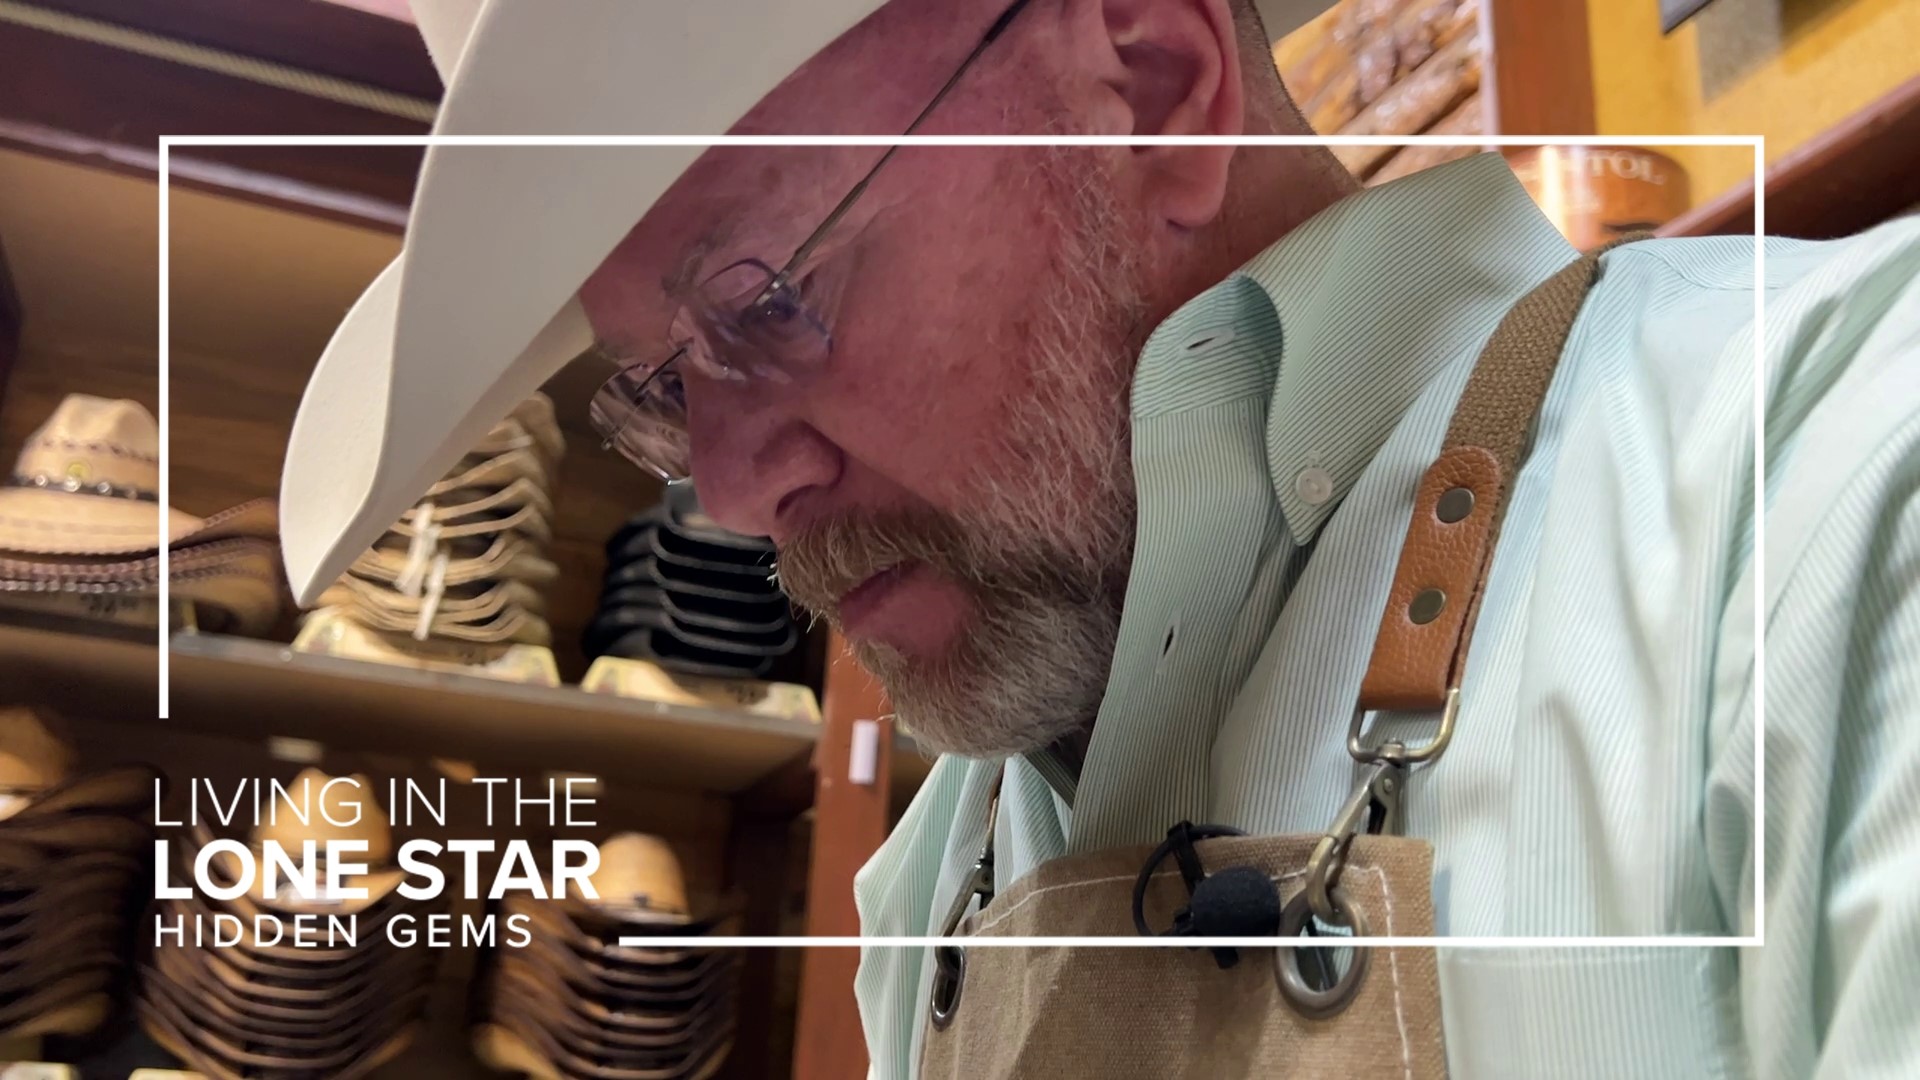 Lawrence Jagneaux creates, cleans, restores, shapes and brands cowboy hats, services that are all in demand ahead of RodeoHouston.